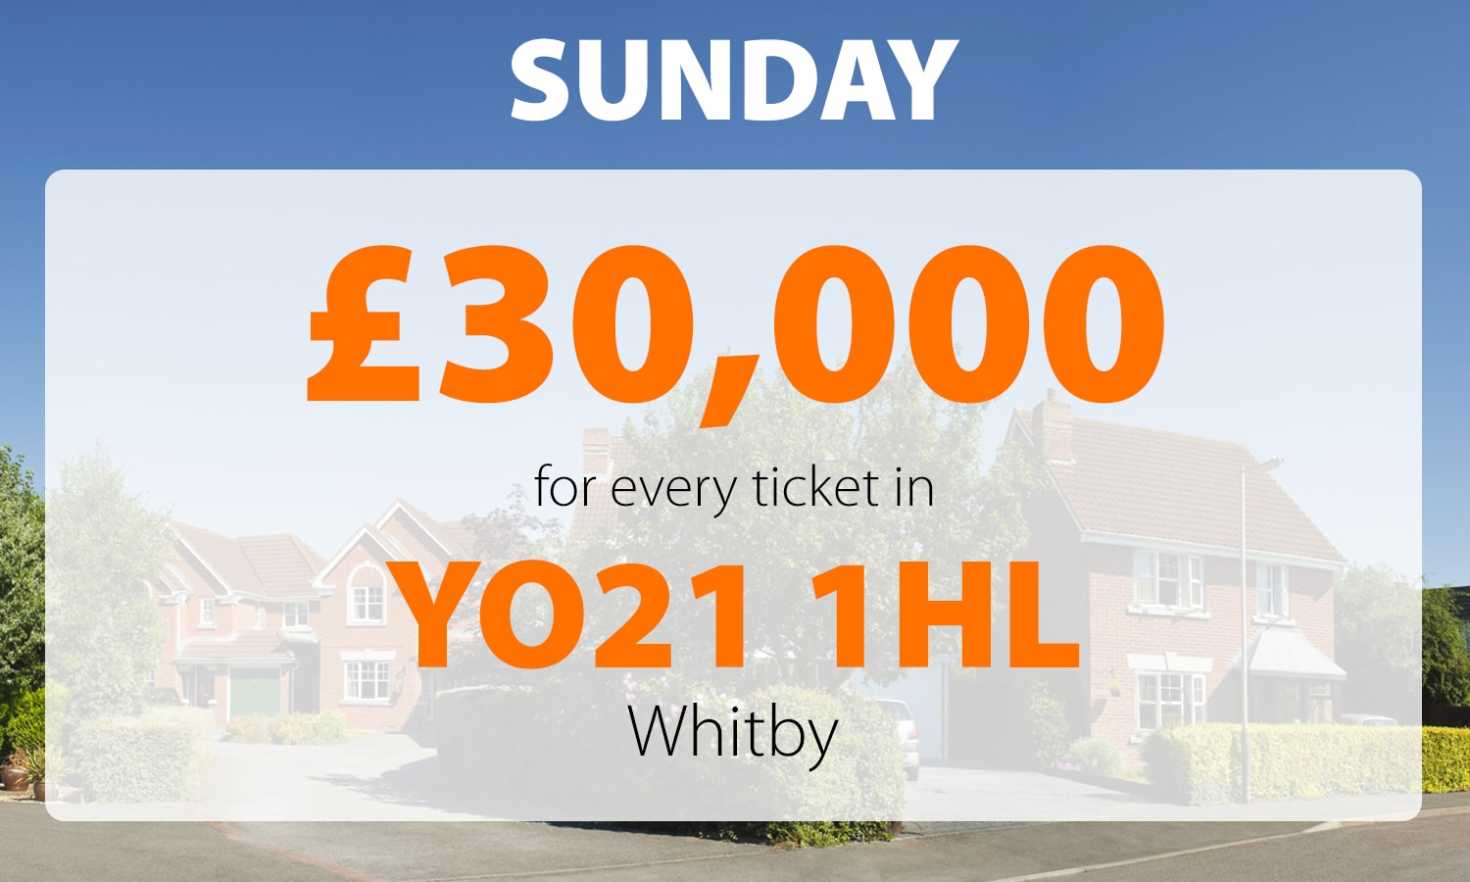 Two Whitby winners have scooped £30,000 each